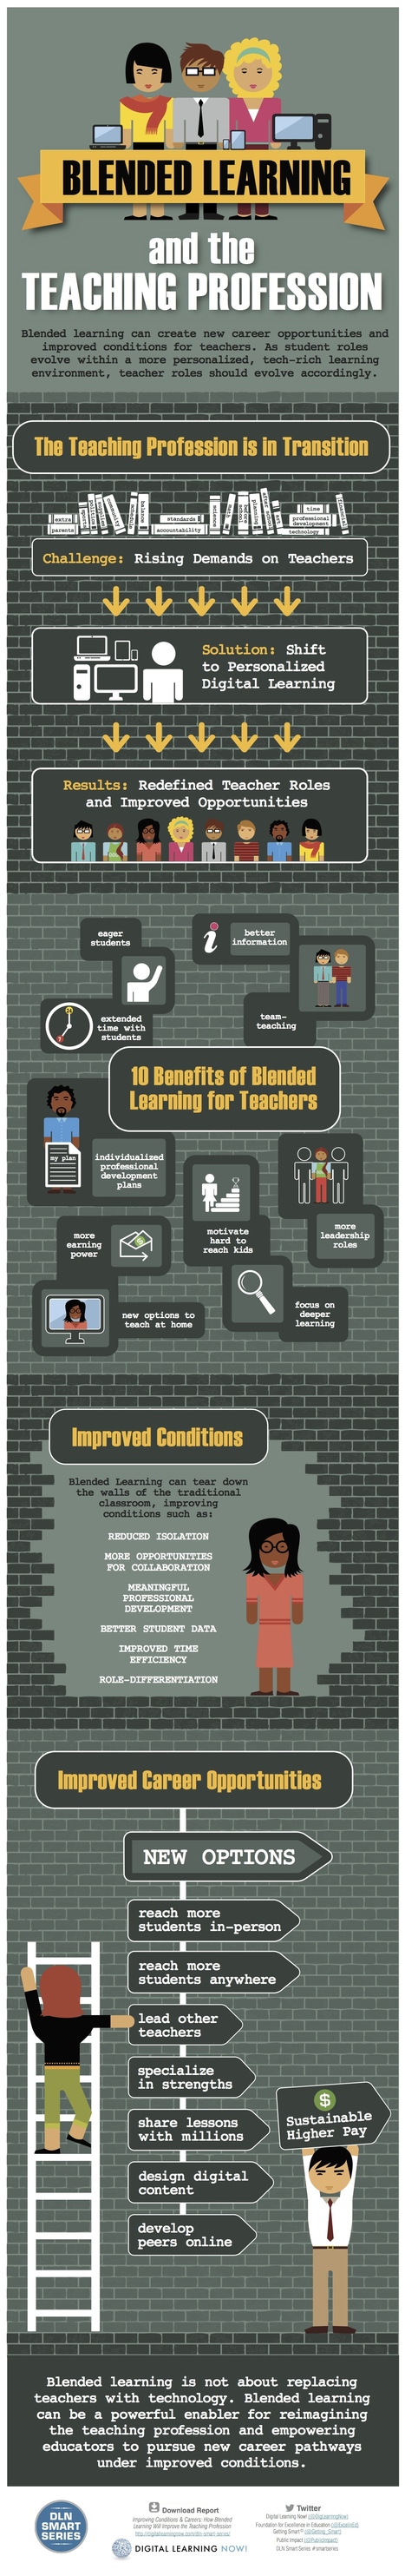 Blended Learning & The Teaching Profession [Infographic] | Create, Innovate & Evaluate in Higher Education | Scoop.it